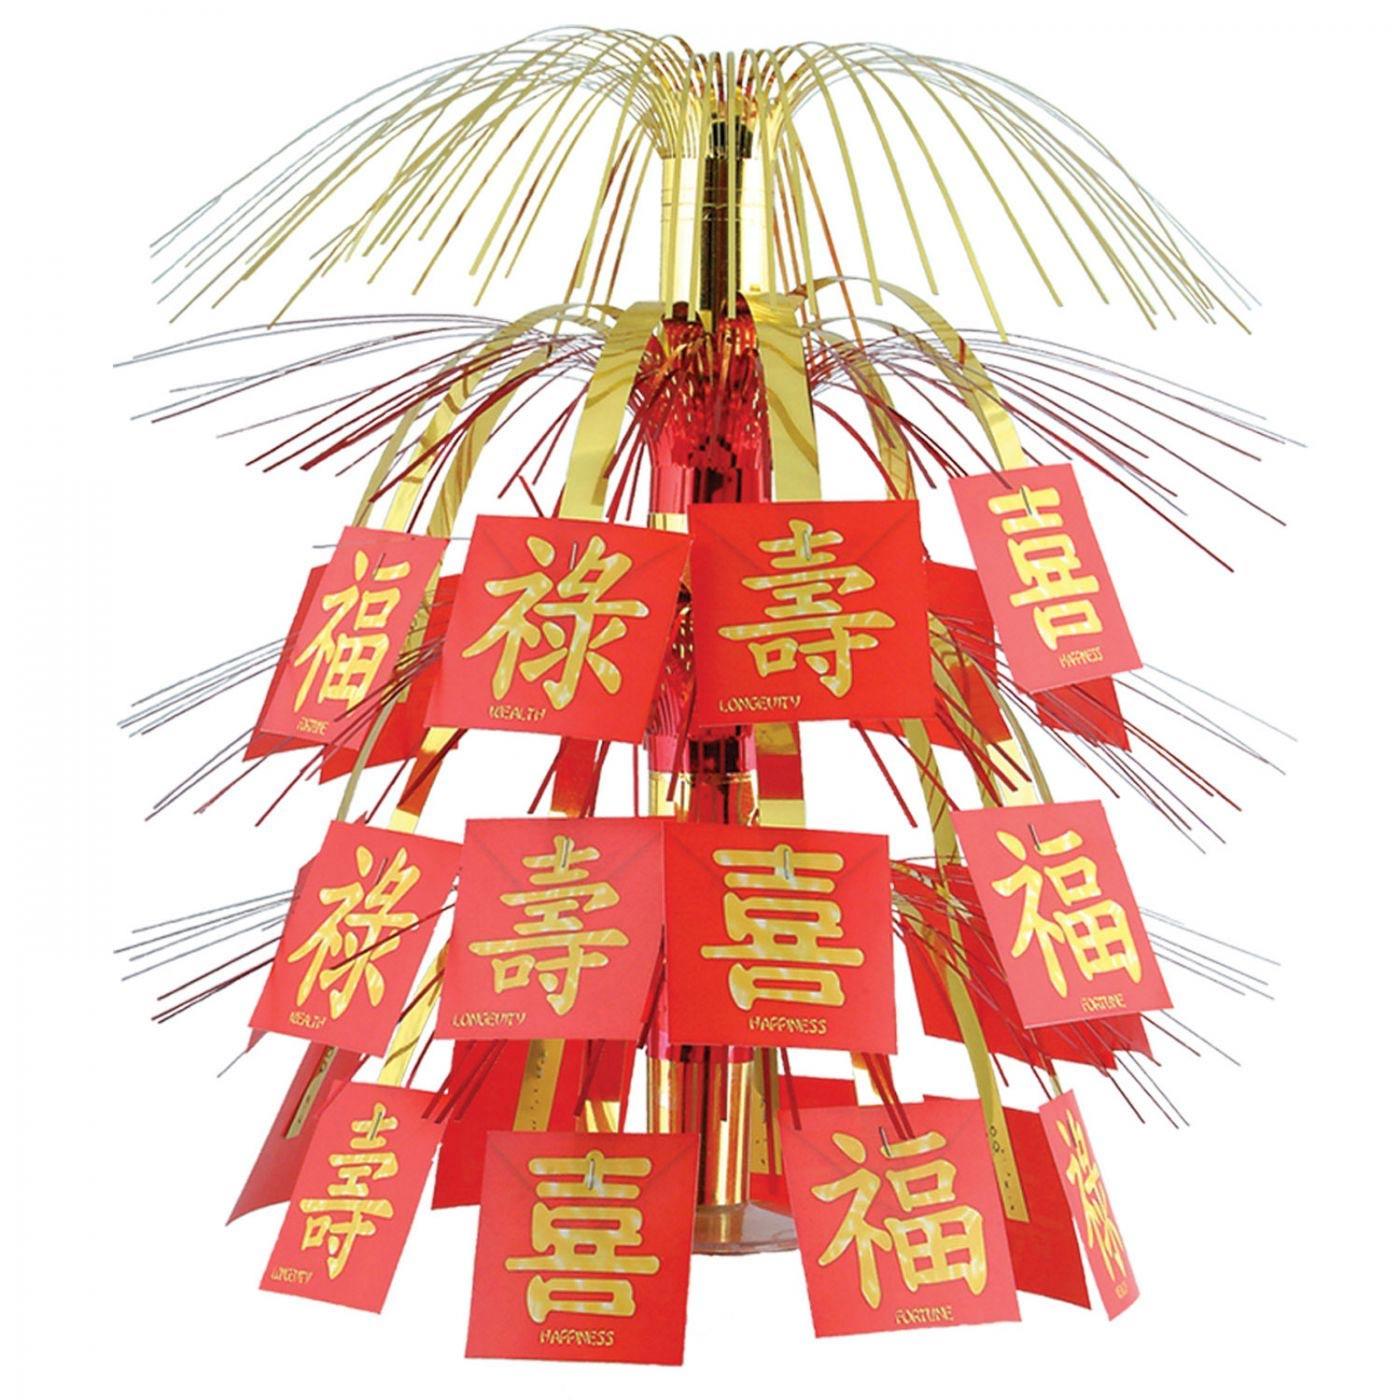 Asian Cascade Centerpiece - 18" by Beistle 50748 available here at Karnival Costumes online party shop